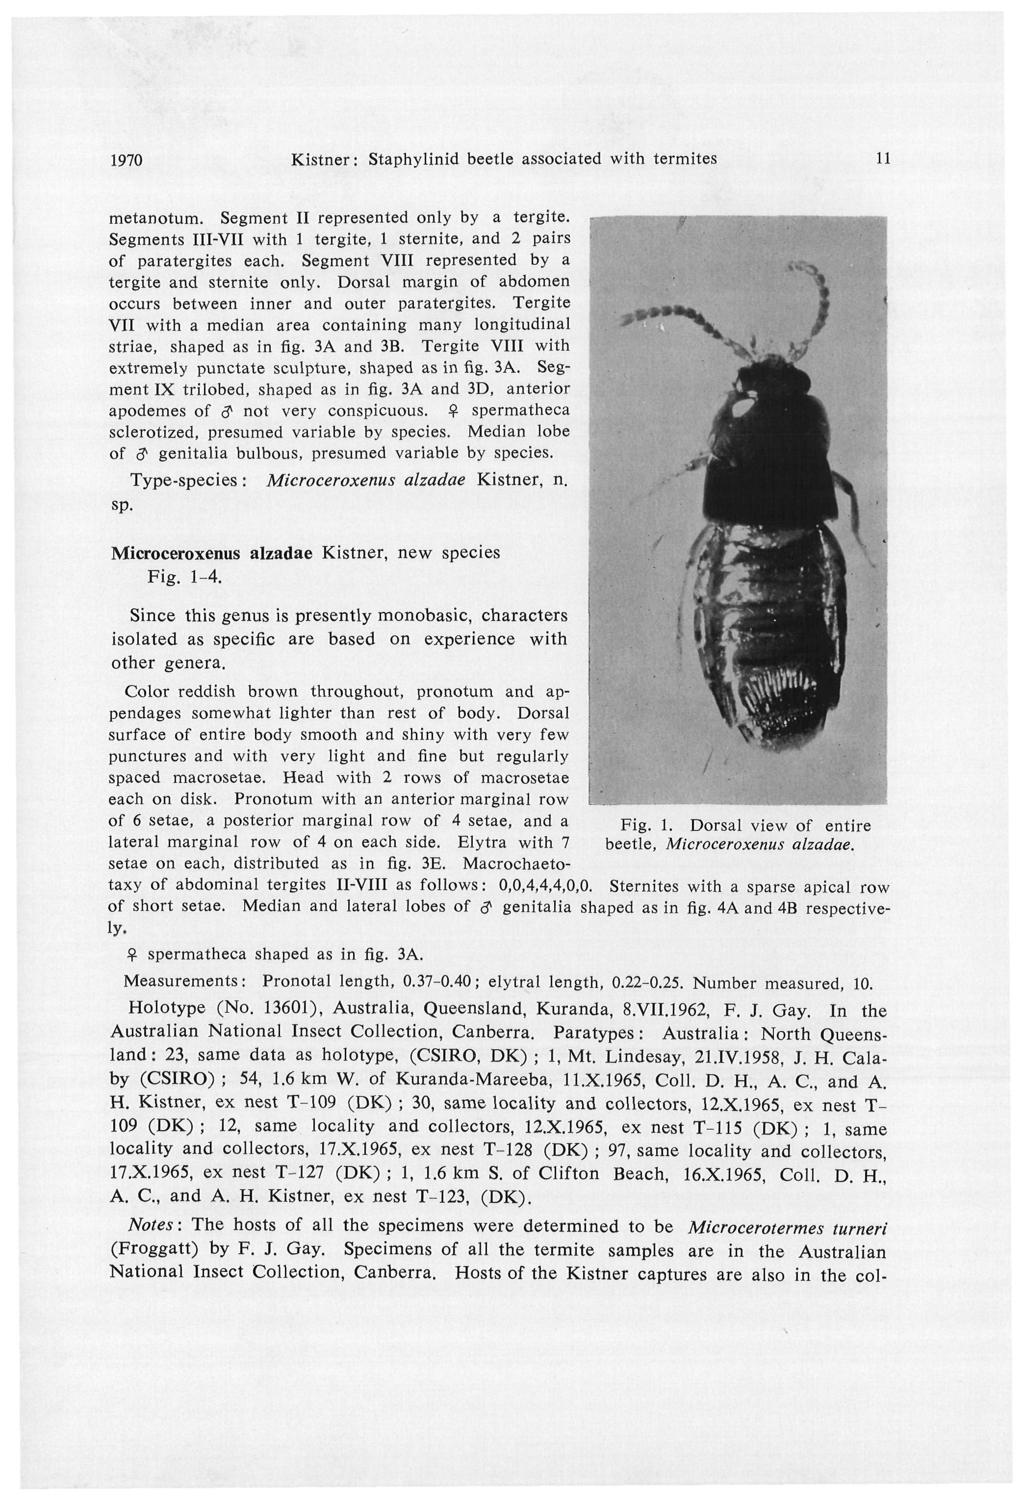 1970 Kistner: Staphylinid beetle associated with termites ll metanotum. Segment II represented only by a tergite. Segments III-VII with 1 tergite, 1 sternite, and 2 pairs of paratergites each.